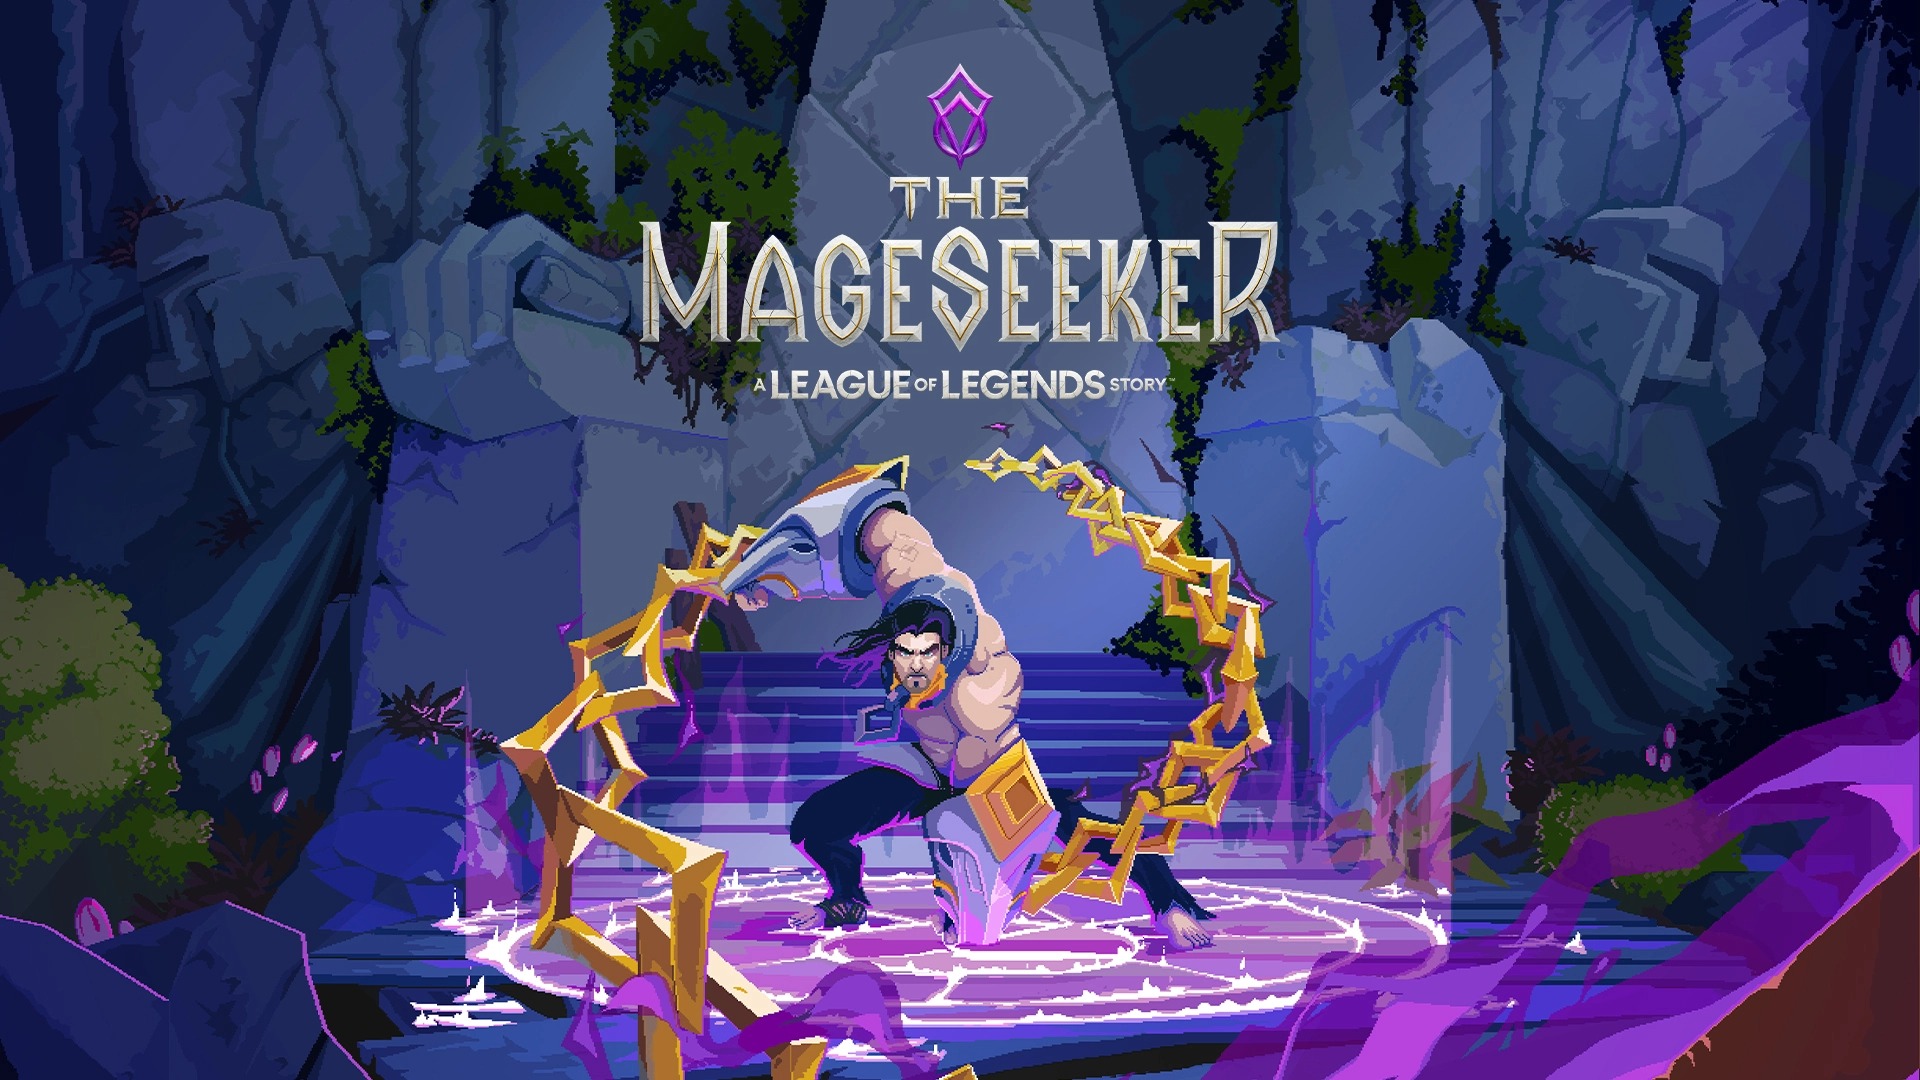 The-Mageseeker-1-league-of-legends-riot-forge-1